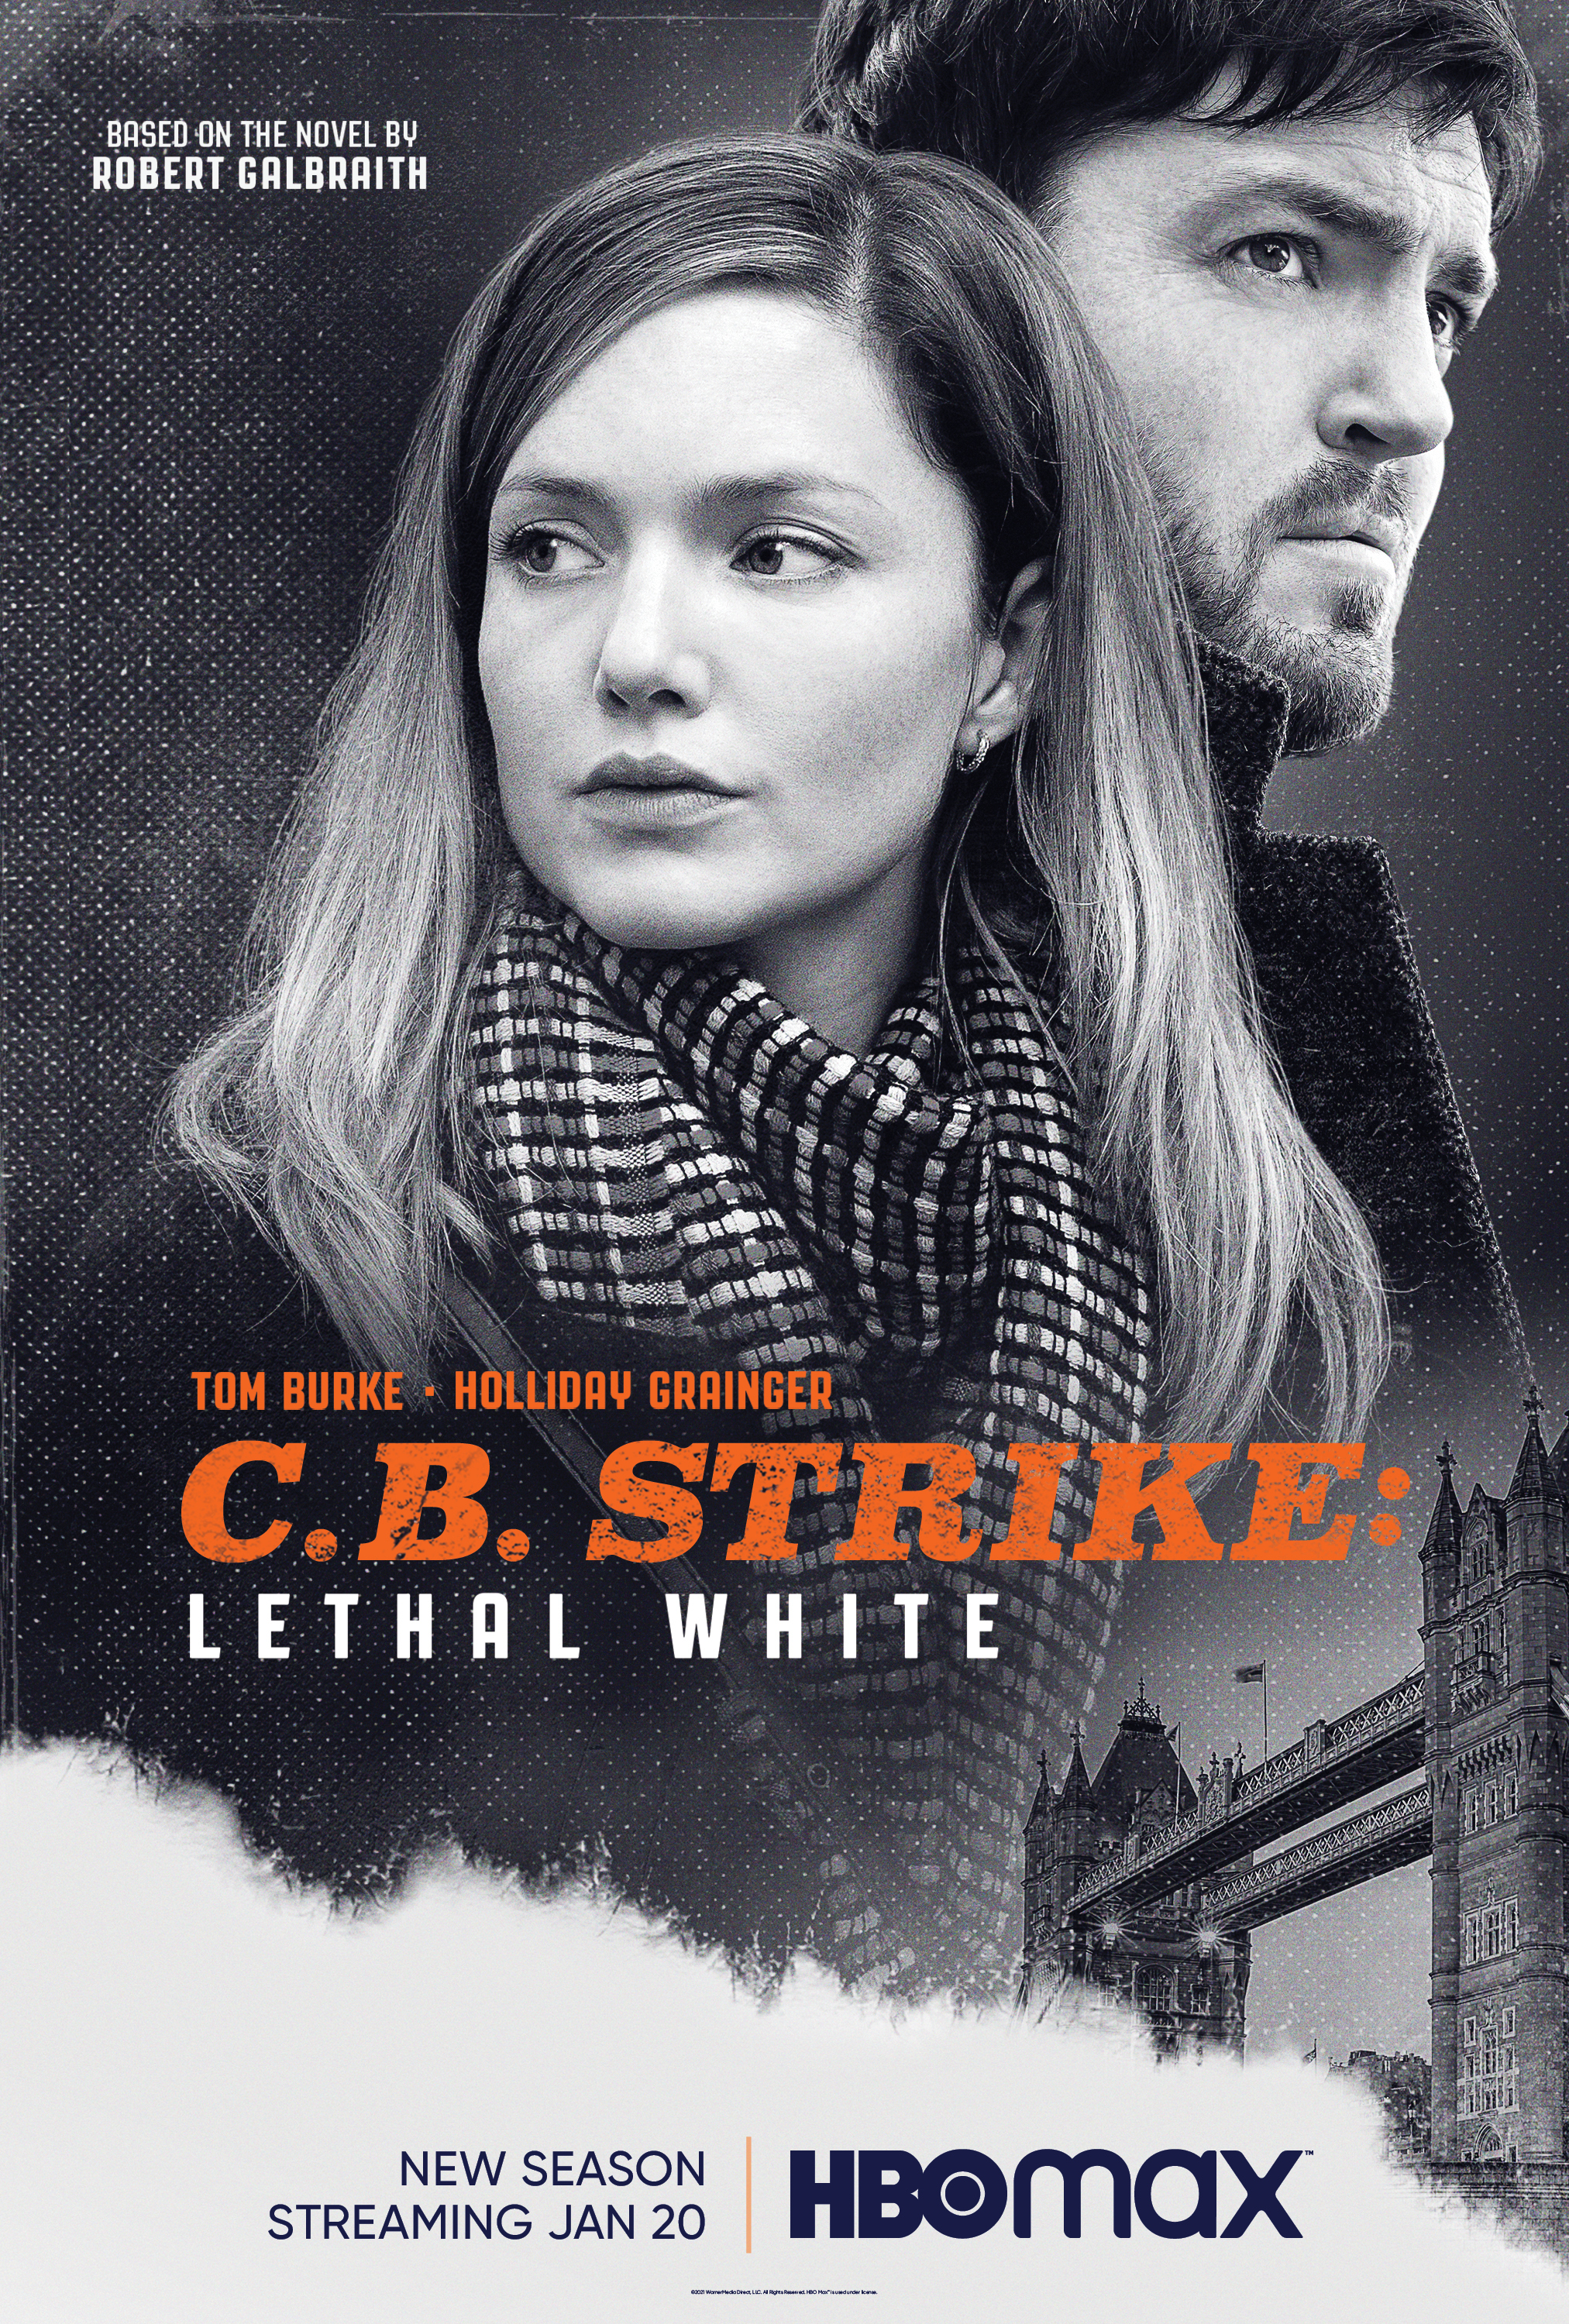 How to Watch Strike: Troubled Blood Season 5 in the US for Free